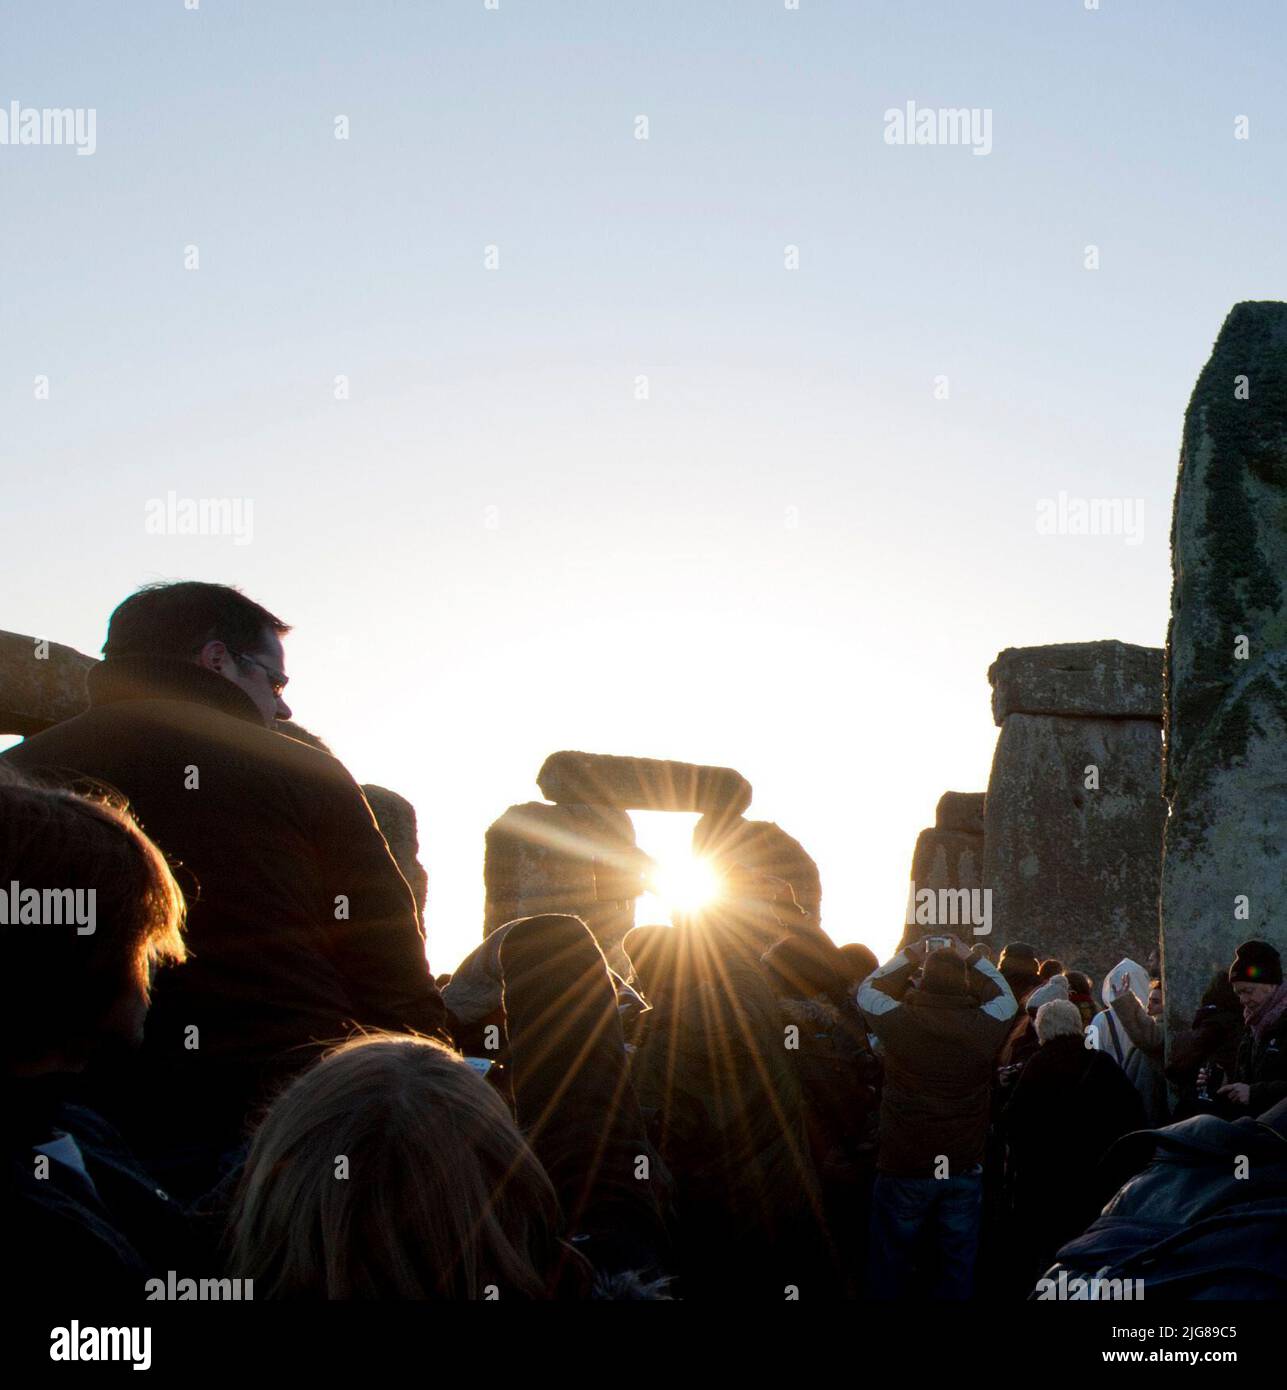 Stonehenge, Stonehenge Down, Amesbury, Wiltshire, 19-12-2012. General view of crowds watching the sun rise through a trilithon at Stonehenge on the winter solstice. Stock Photo